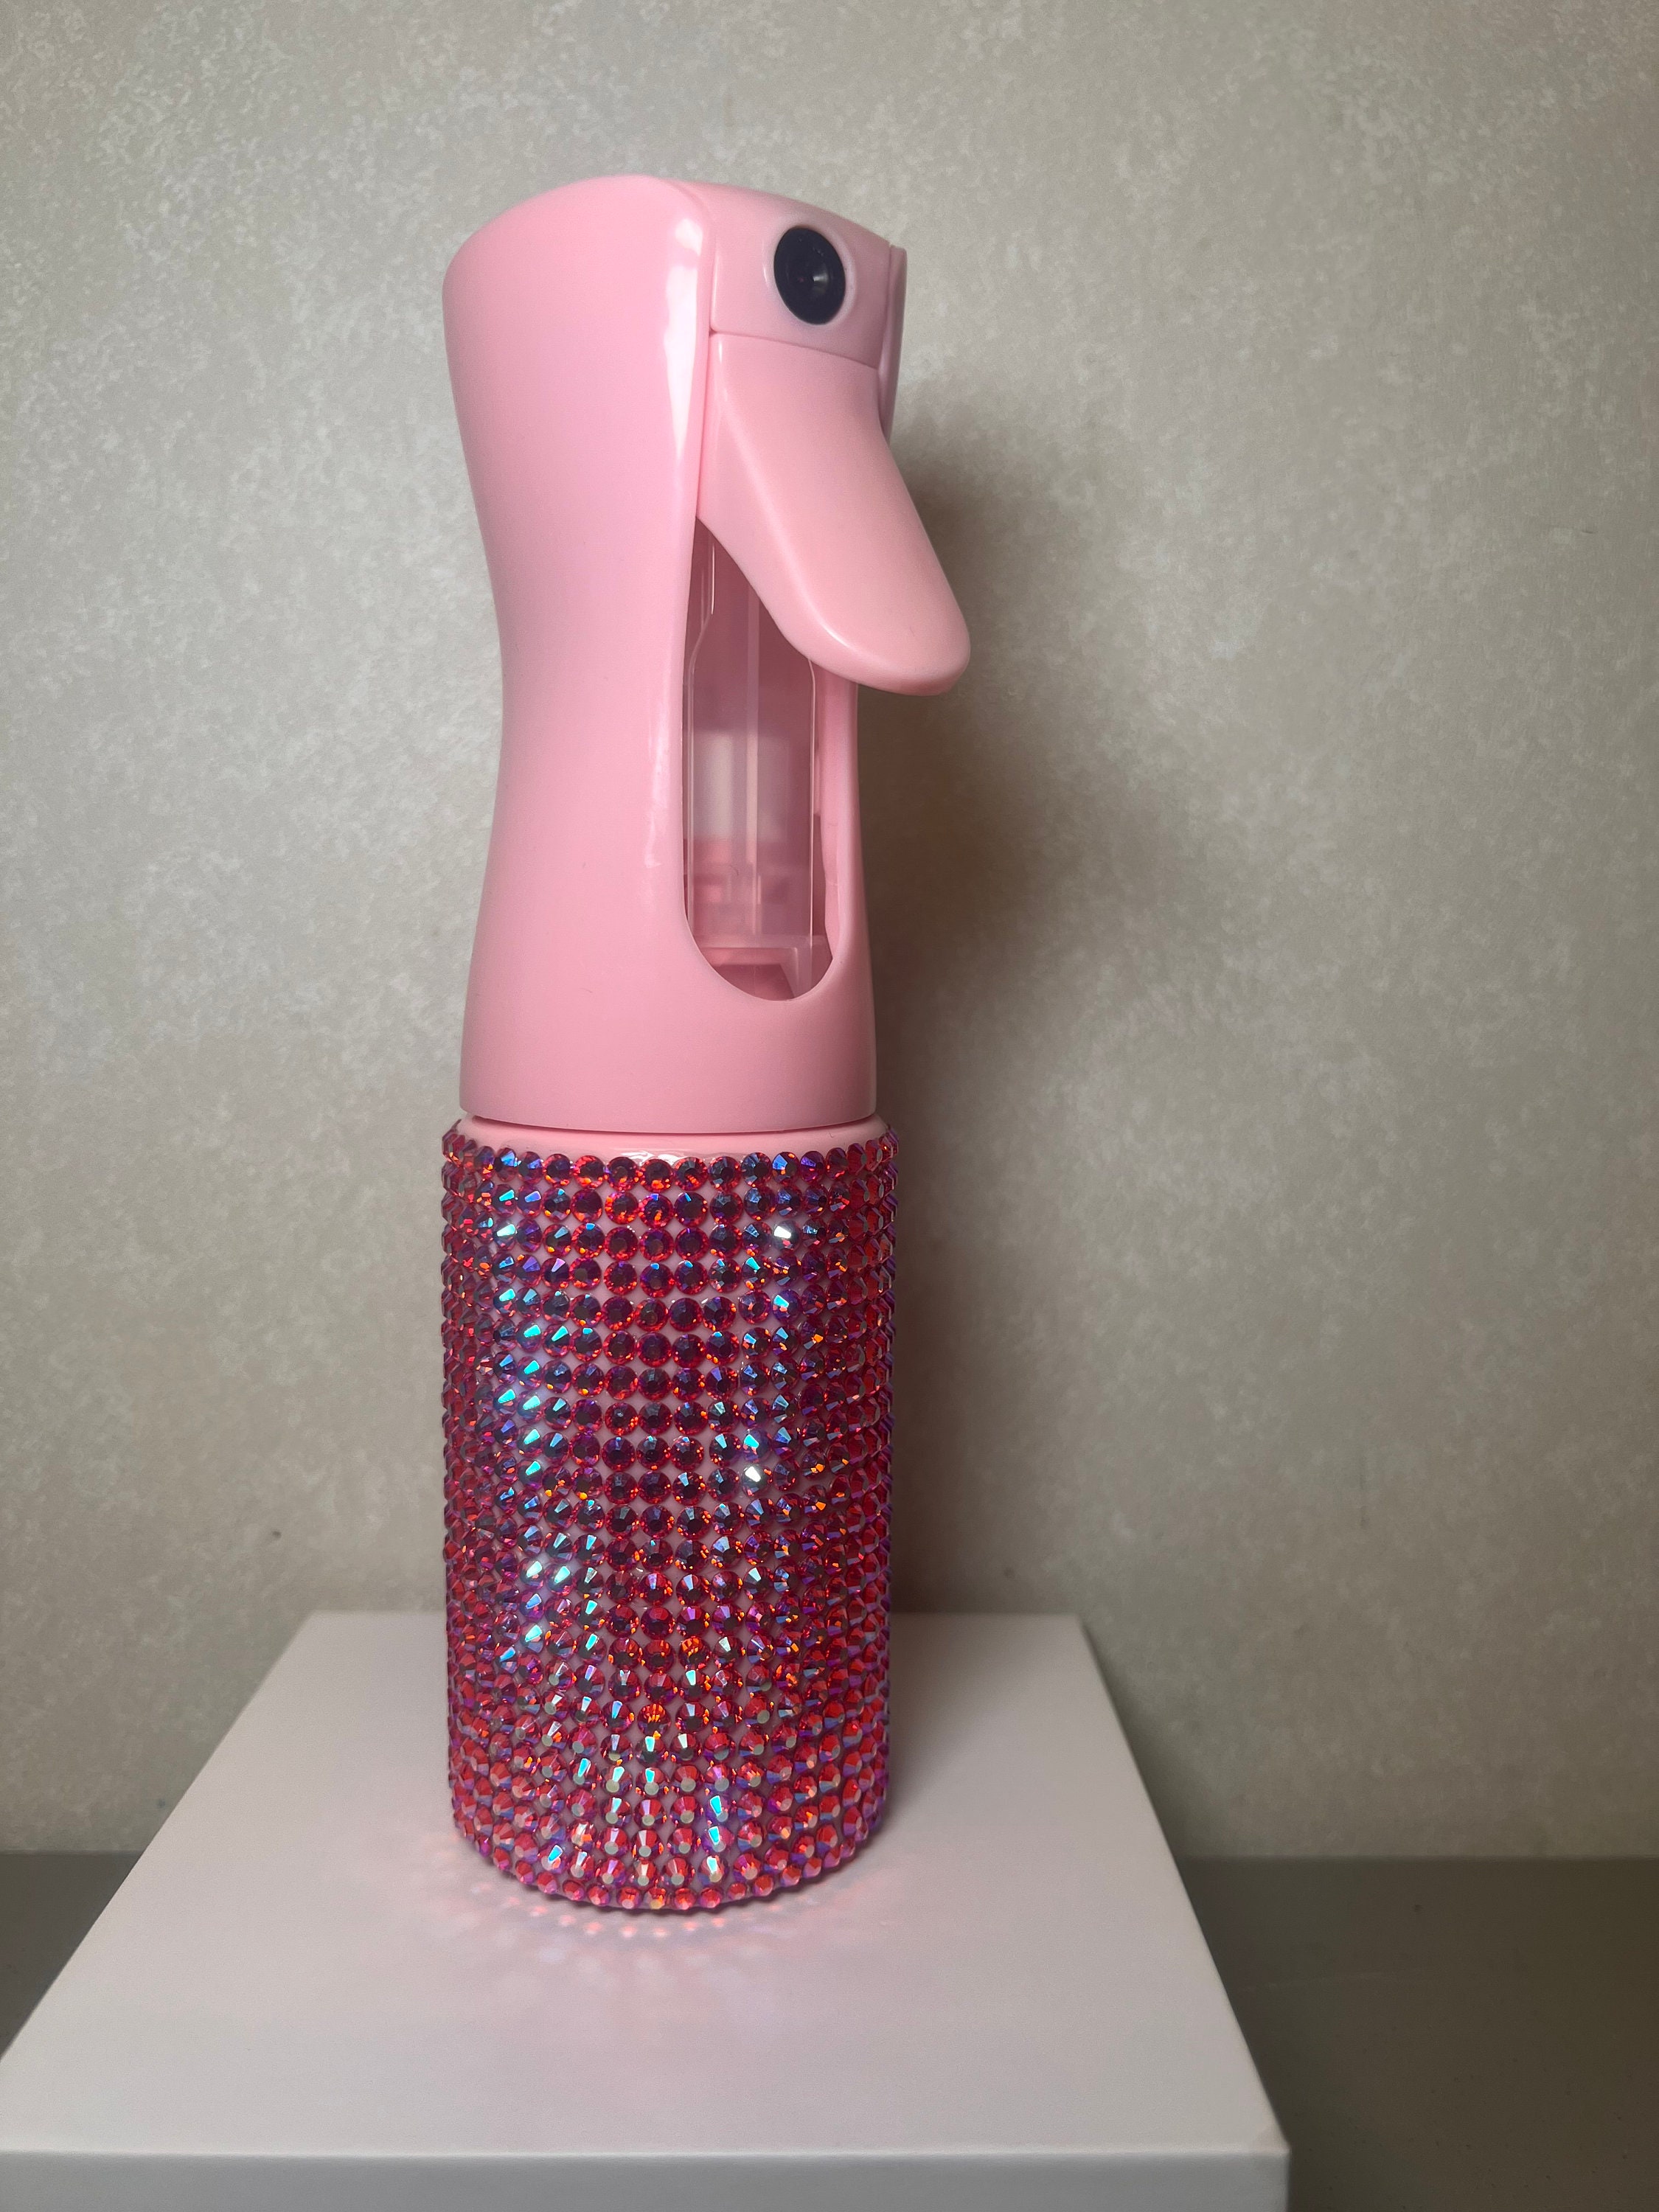 Bedazzling Brush And Spray Bottle!